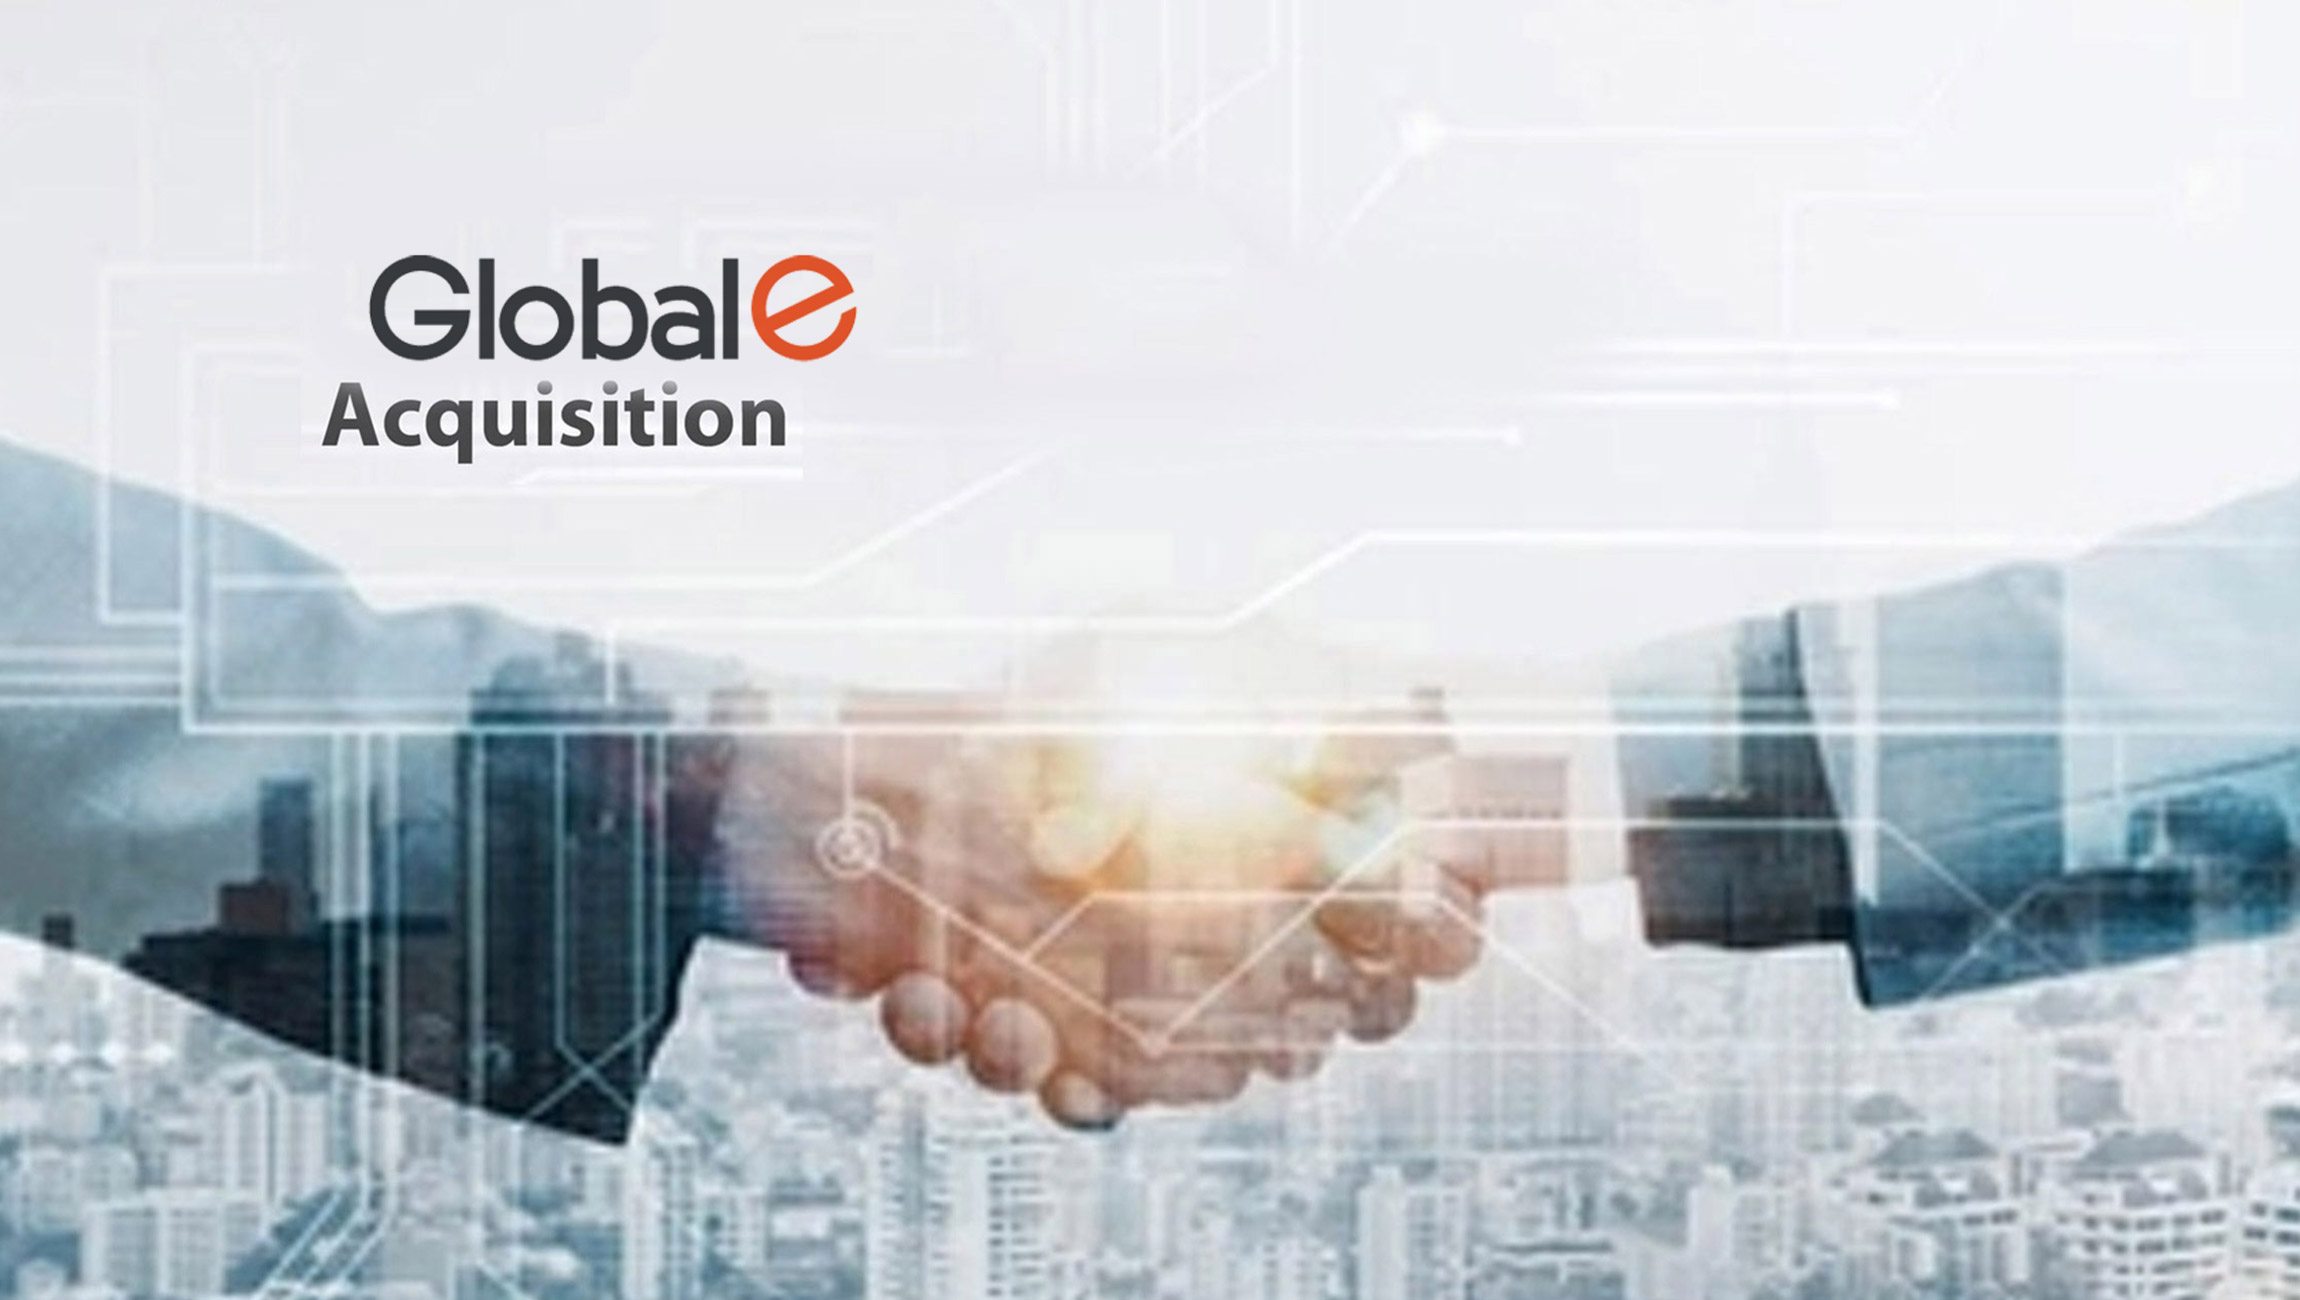 Global-e Announces Closing of Acquisition of Flow Commerce and Expansion of its Leadership Team